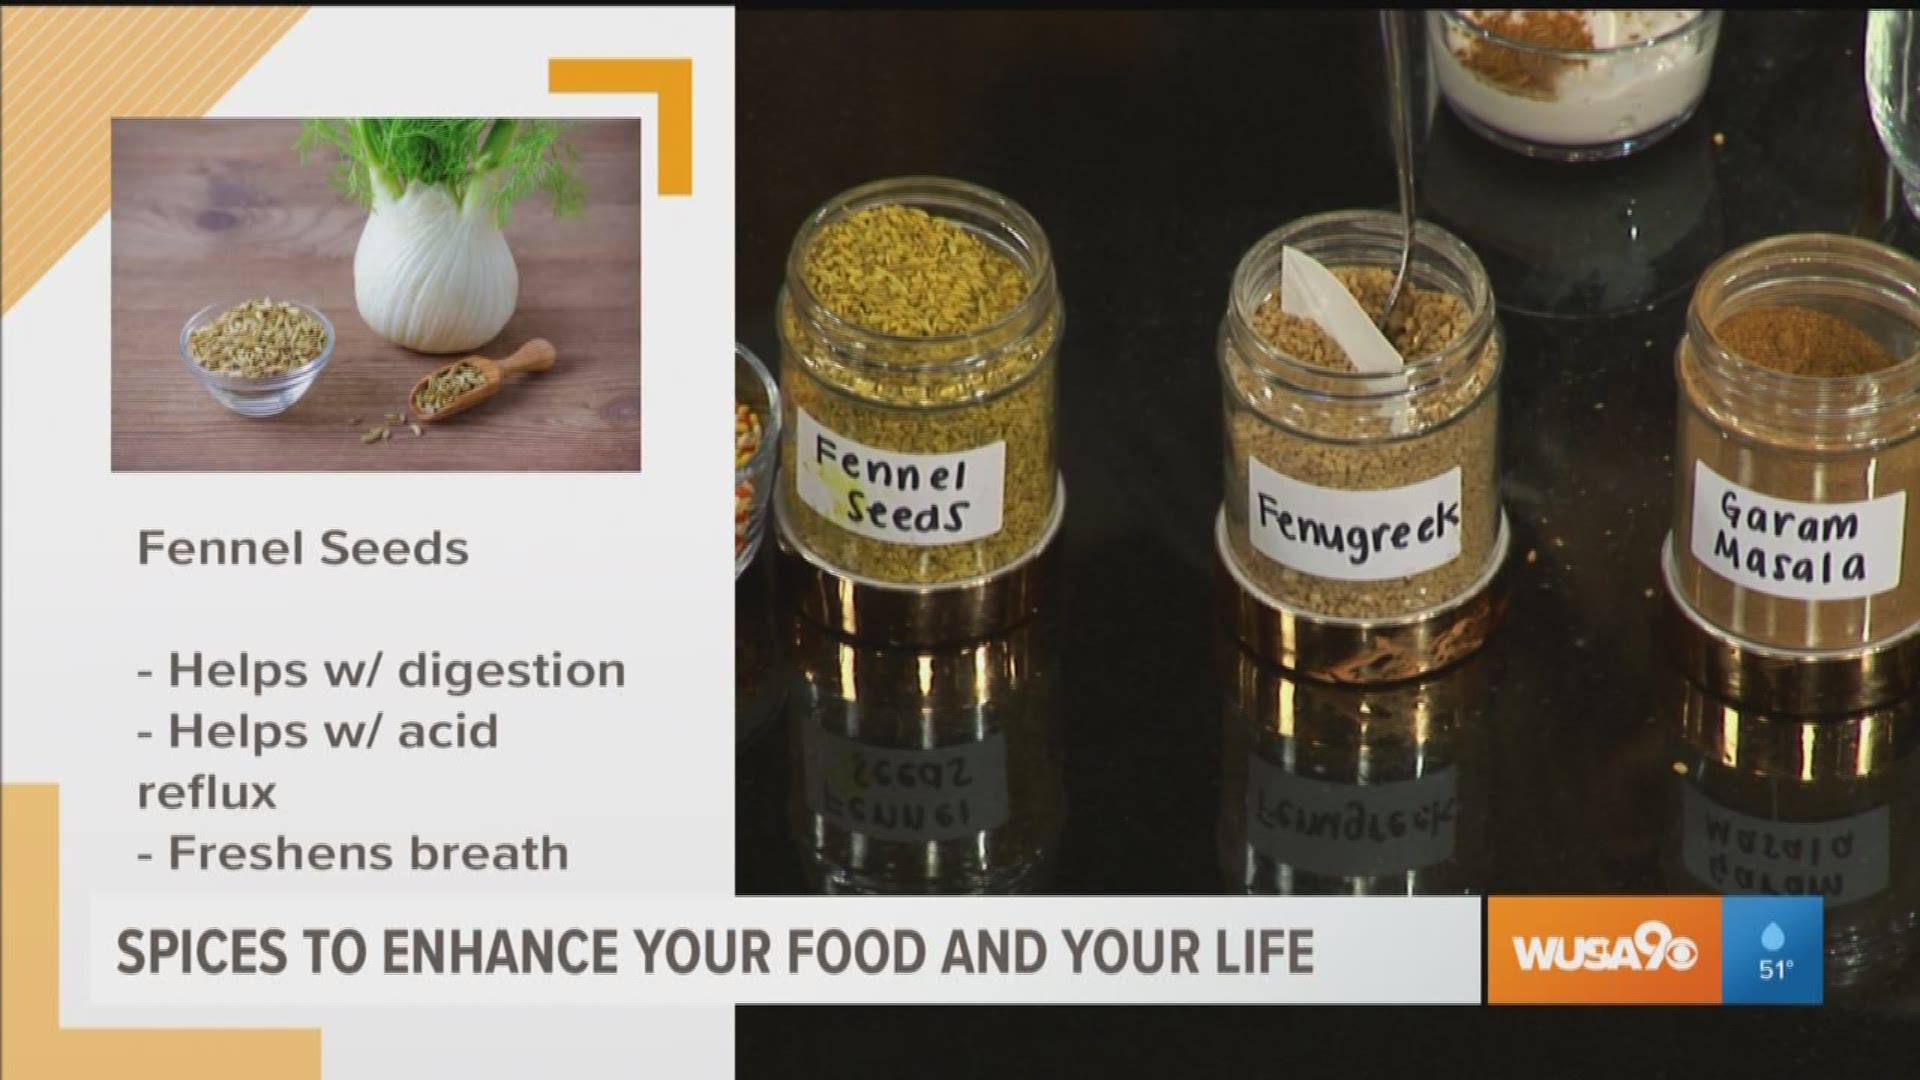 Author of "Spice for Life" Dr. Minni Malhotra shares her list of spices that add flavor to your food while at the same time enhancing the flavor of your food.